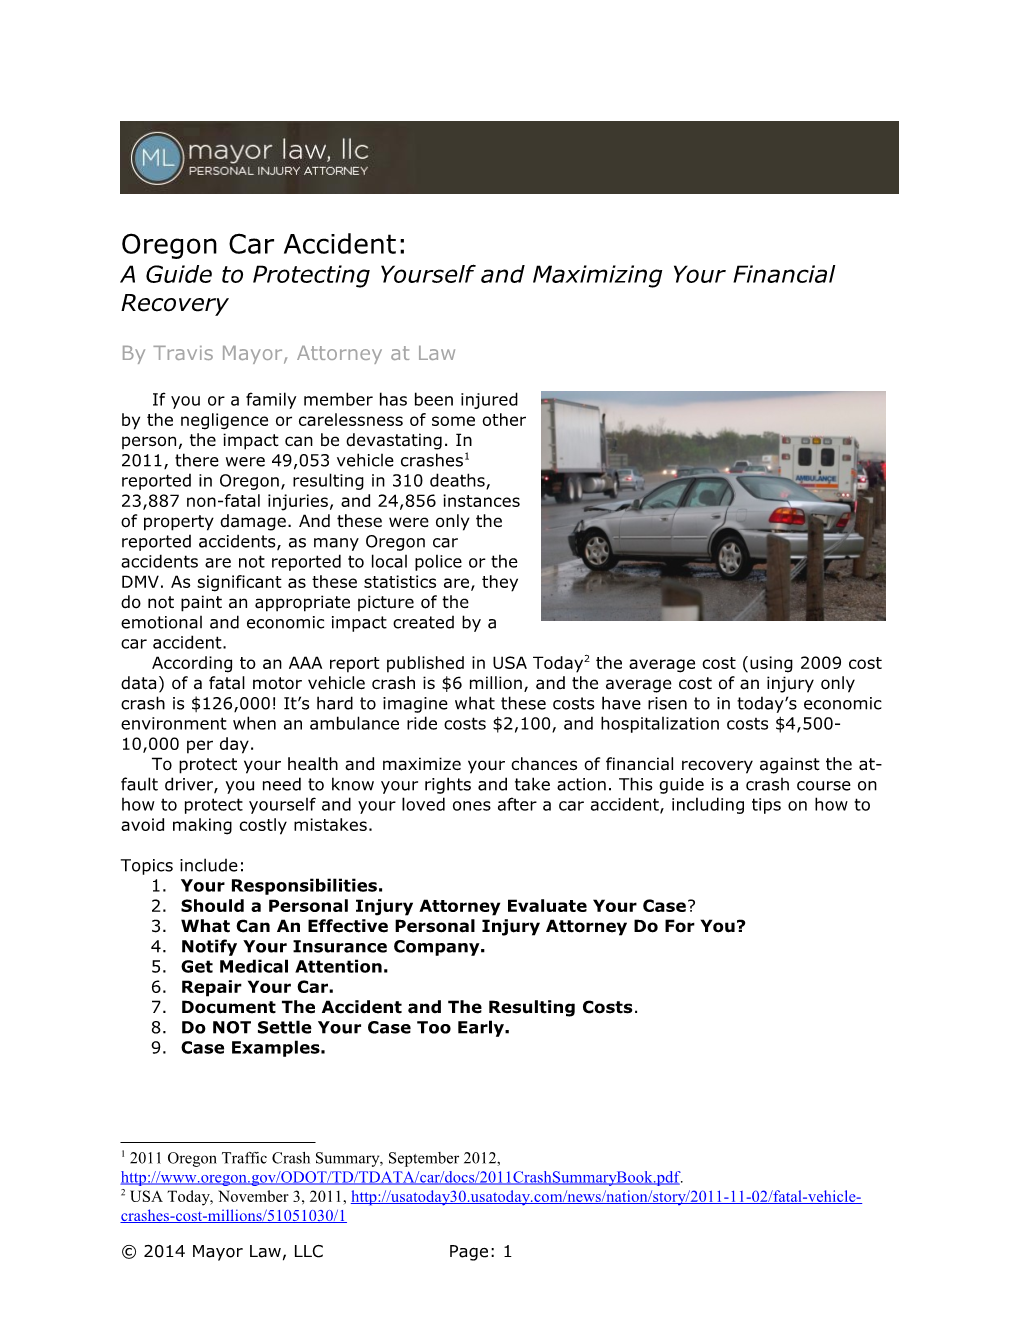 Oregon Car Accidents: a Guide to Protecting Yourself and Maximizing Your Financial Recovery